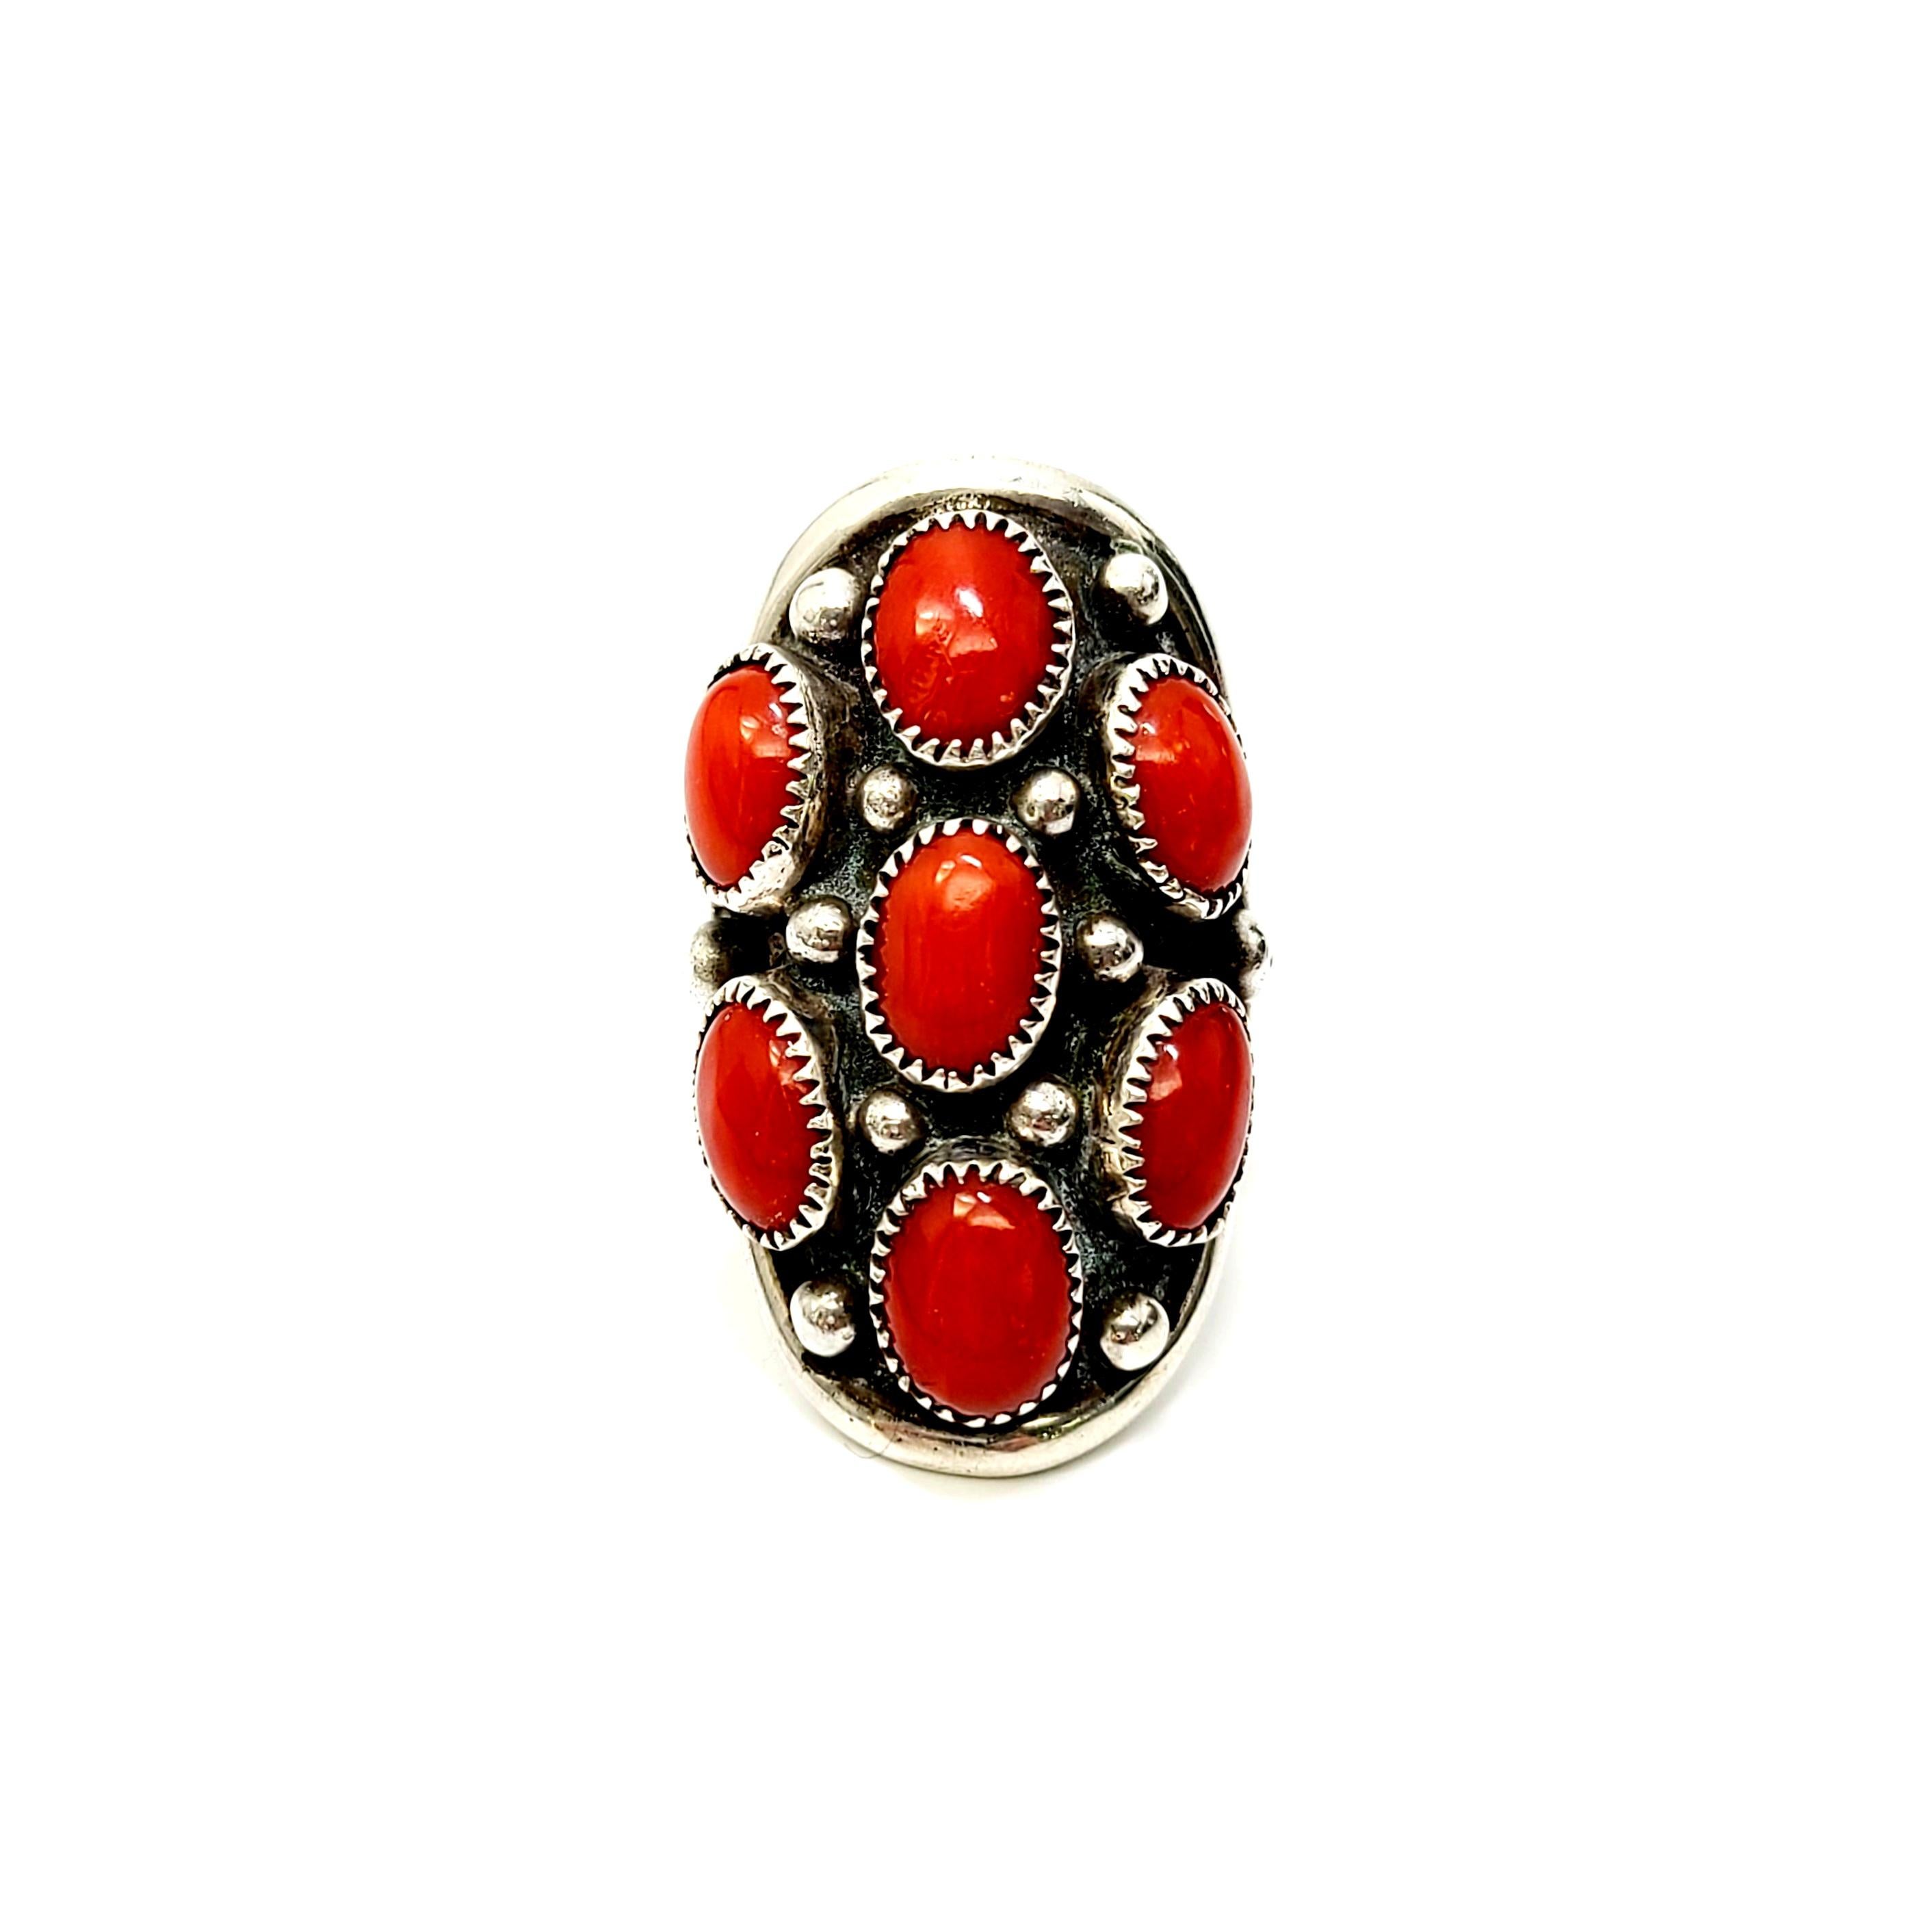 Sterling silver and red coral ring by Native American Navajo artisan Benny Touchine.

Size 5.75

Handmade by well-known Navajo artisan circa 1940s-50s. This oblong design features oval shaped coral stones in saw tooth bezels.

Measures approx 1 3/8